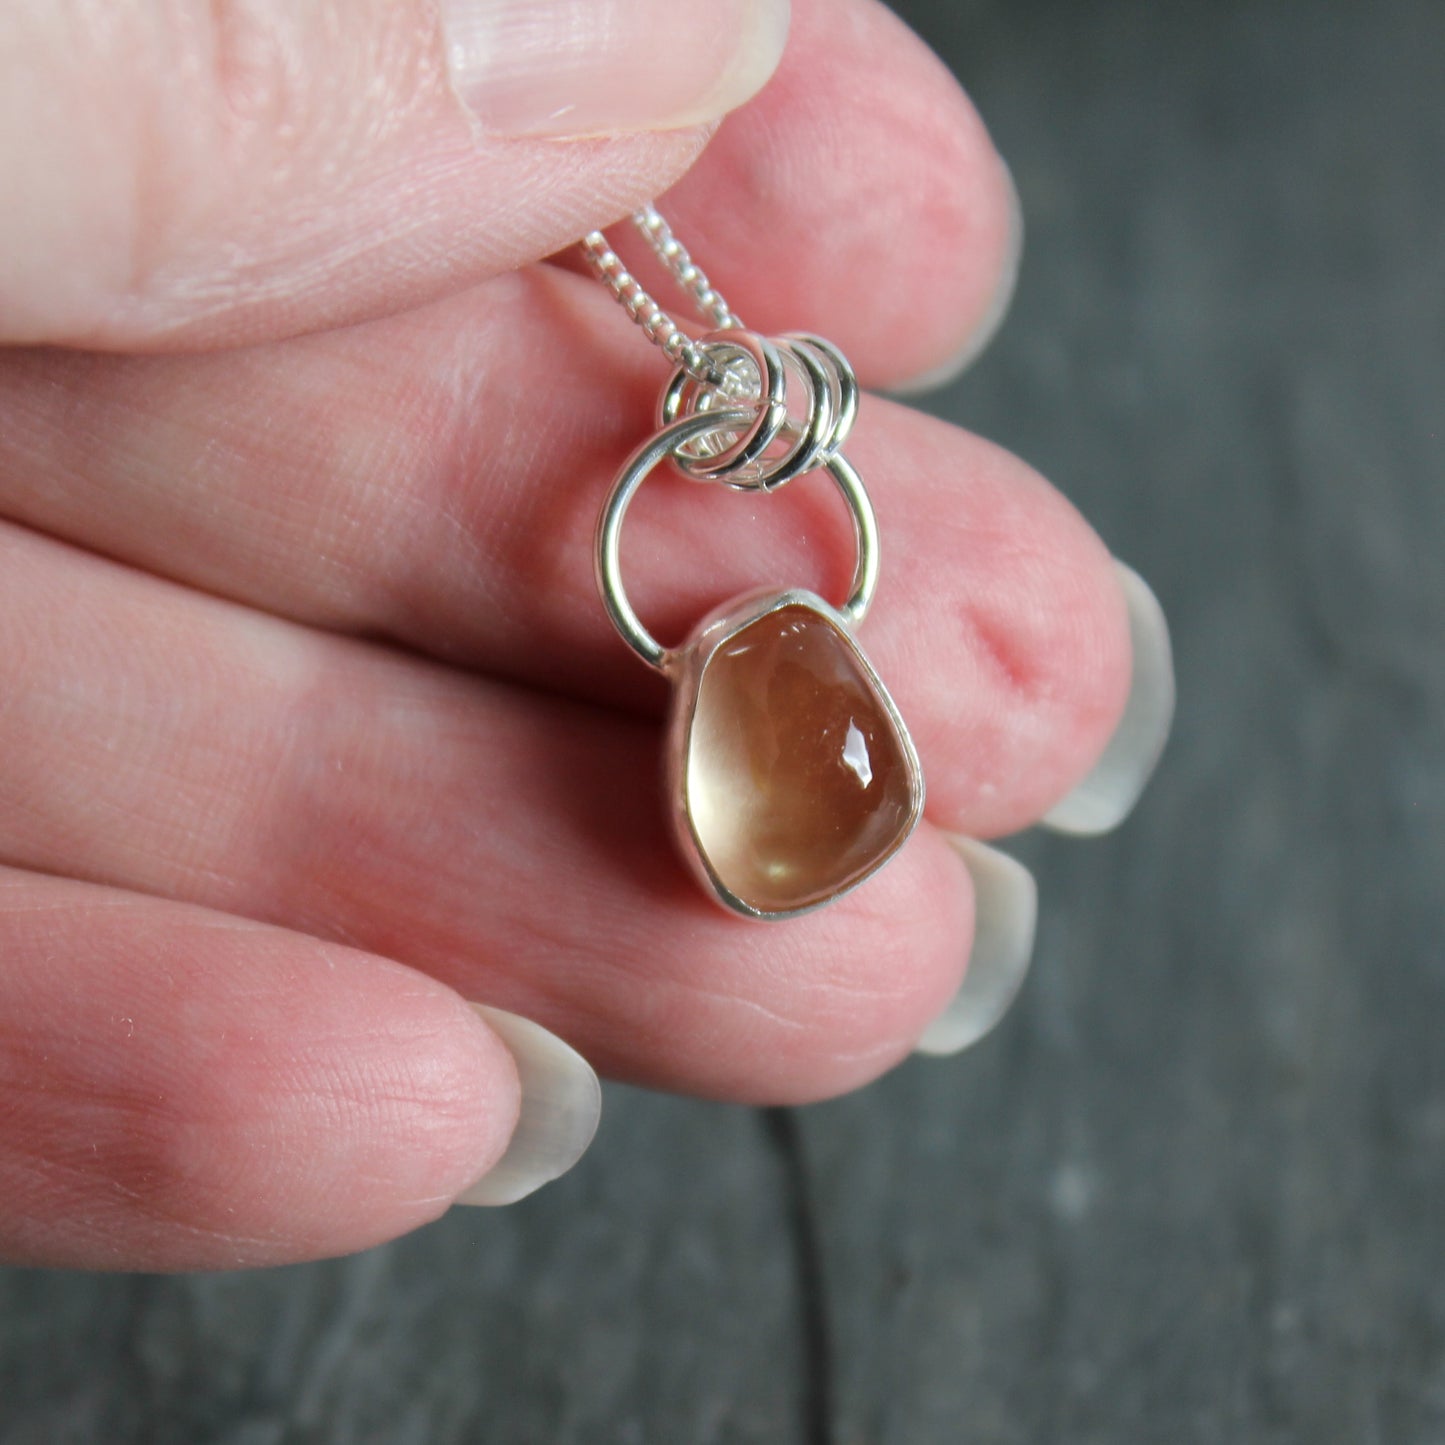 This small 10mm x 12mm peach Oregon sunstone is set in a fine & sterling silver bezel setting on an 18" chain. 